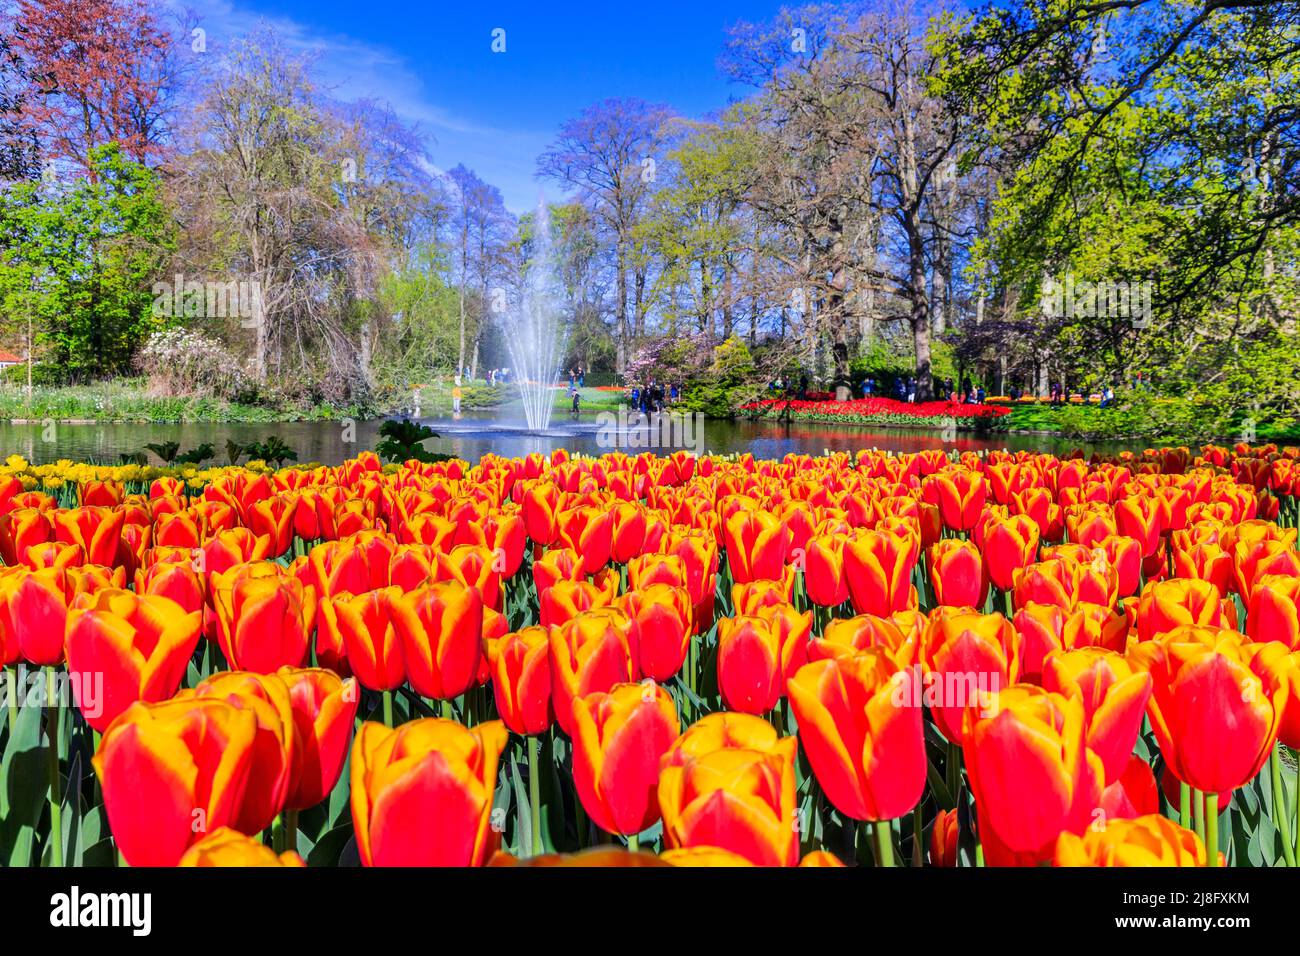 Blooming colorful tulips flowerbed in Keukenhof public flower garden with water fountain. Lisse, Holland, Netherlands. Stock Photo